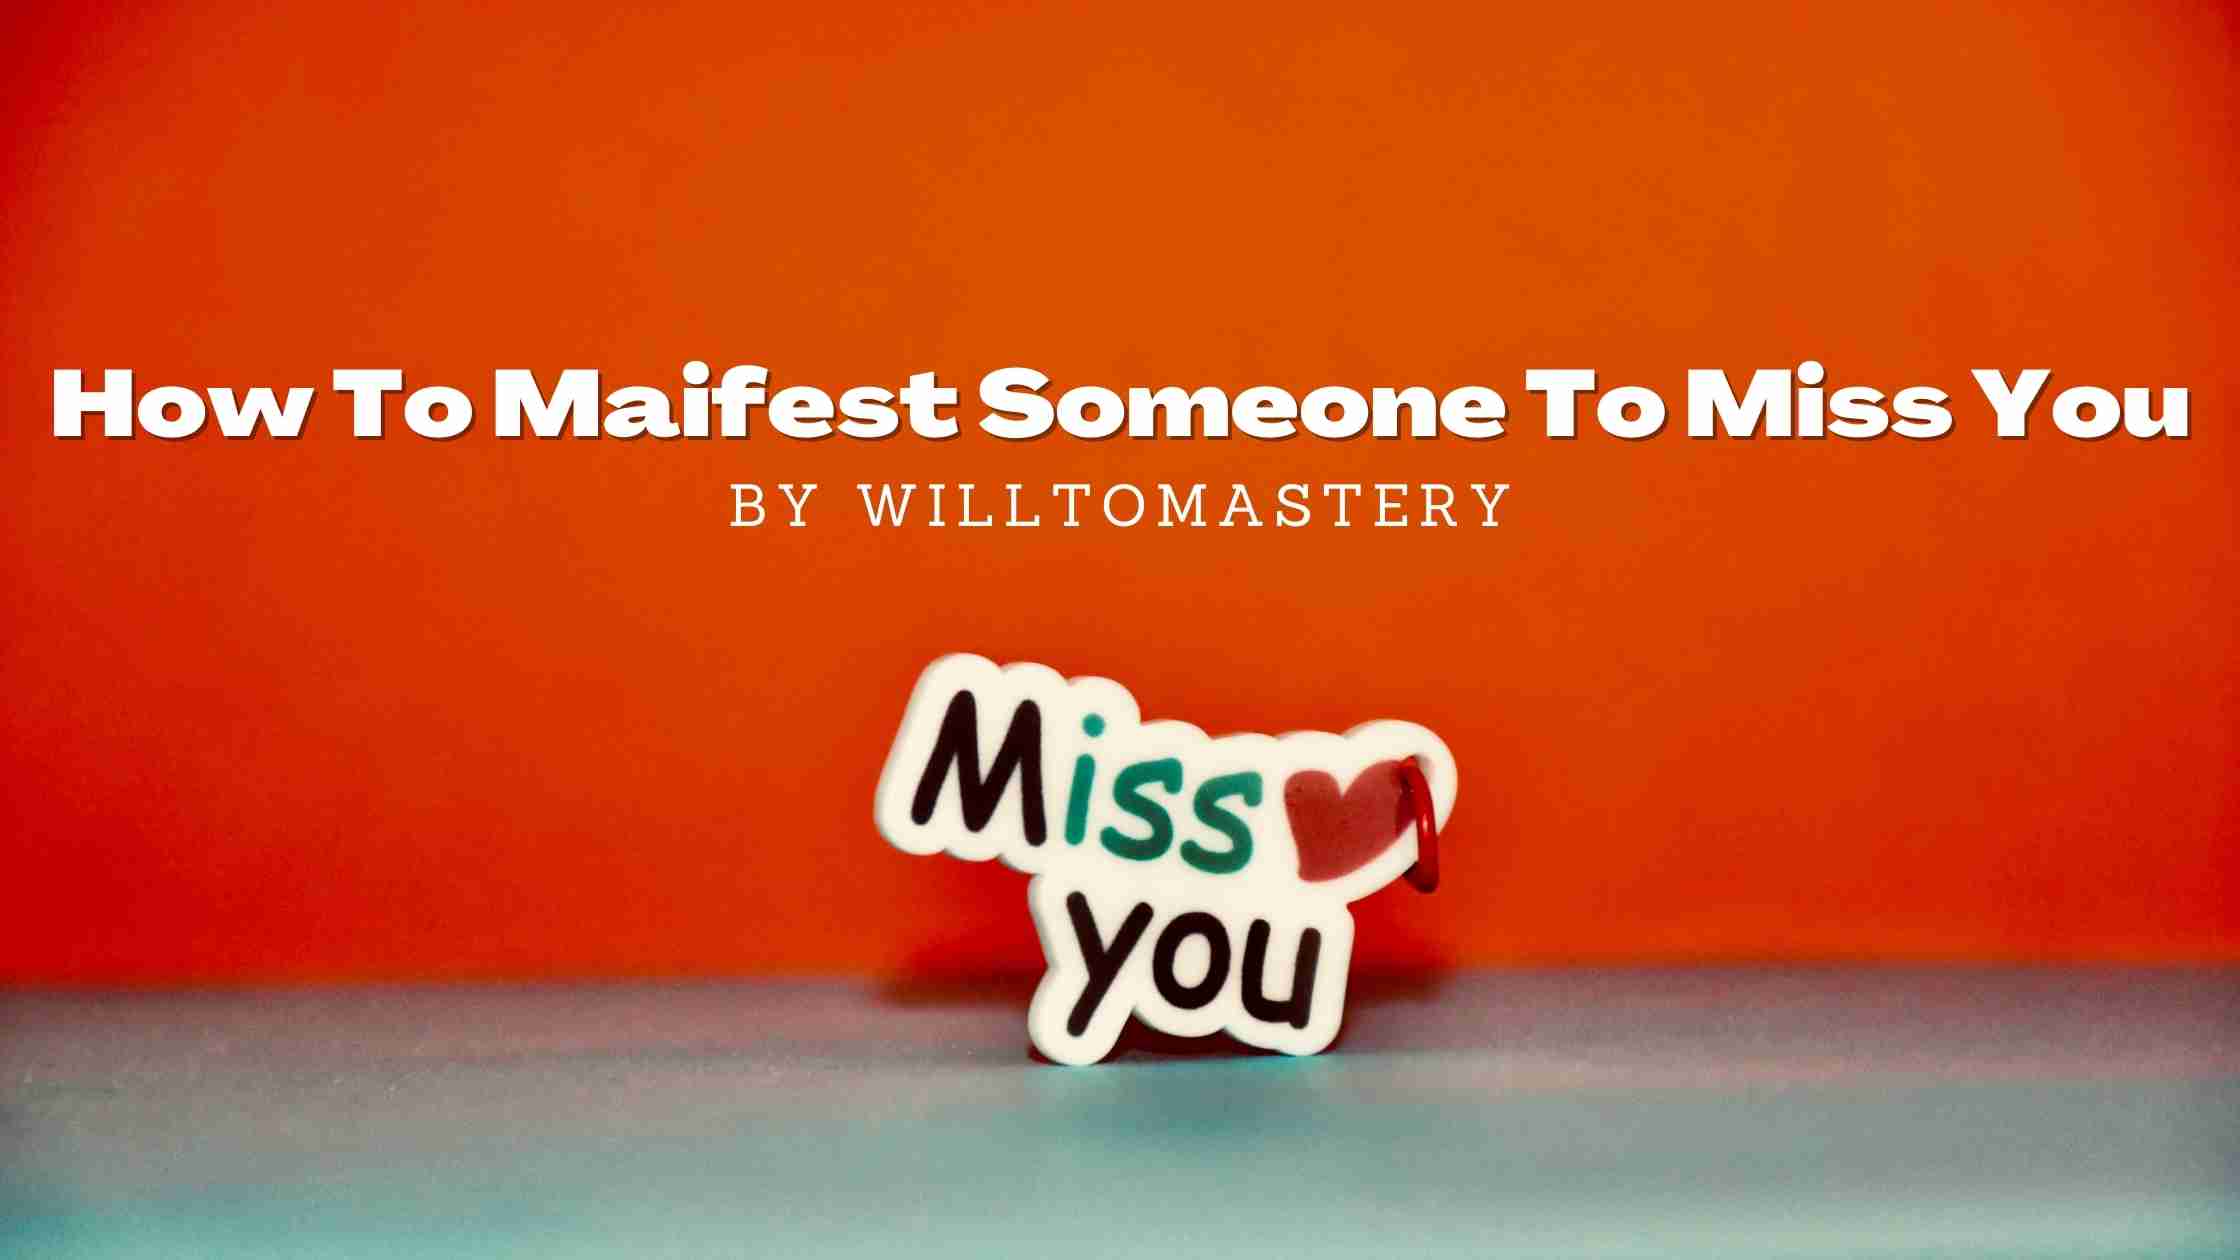 How To Manifest Someone To Miss You